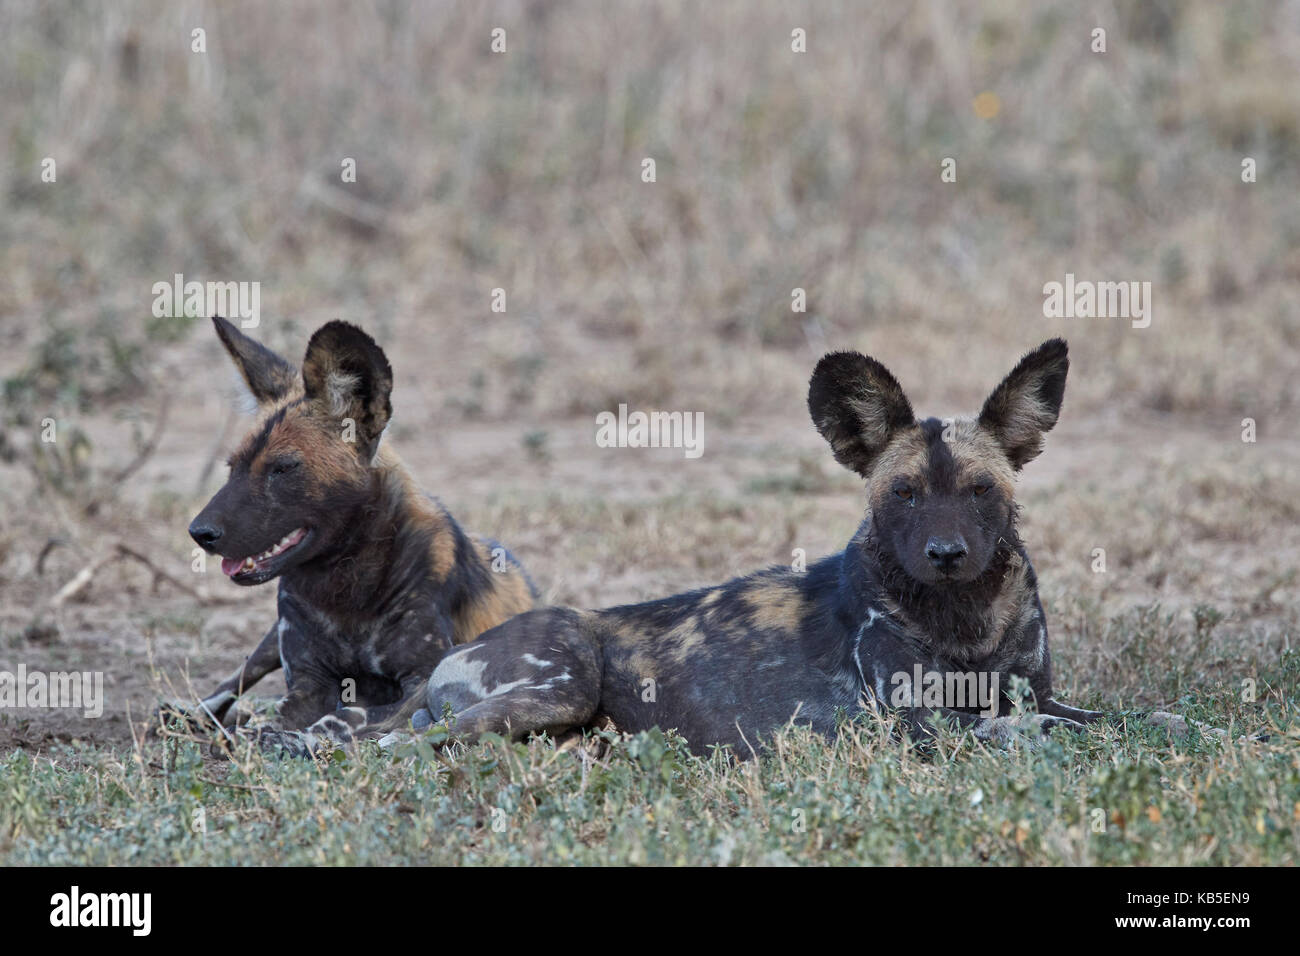 African wild dog (African hunting dog) (Cape hunting dog) (Lycaon pictus), Ngorongoro Conservation Area, Tanzania, East Africa Stock Photo